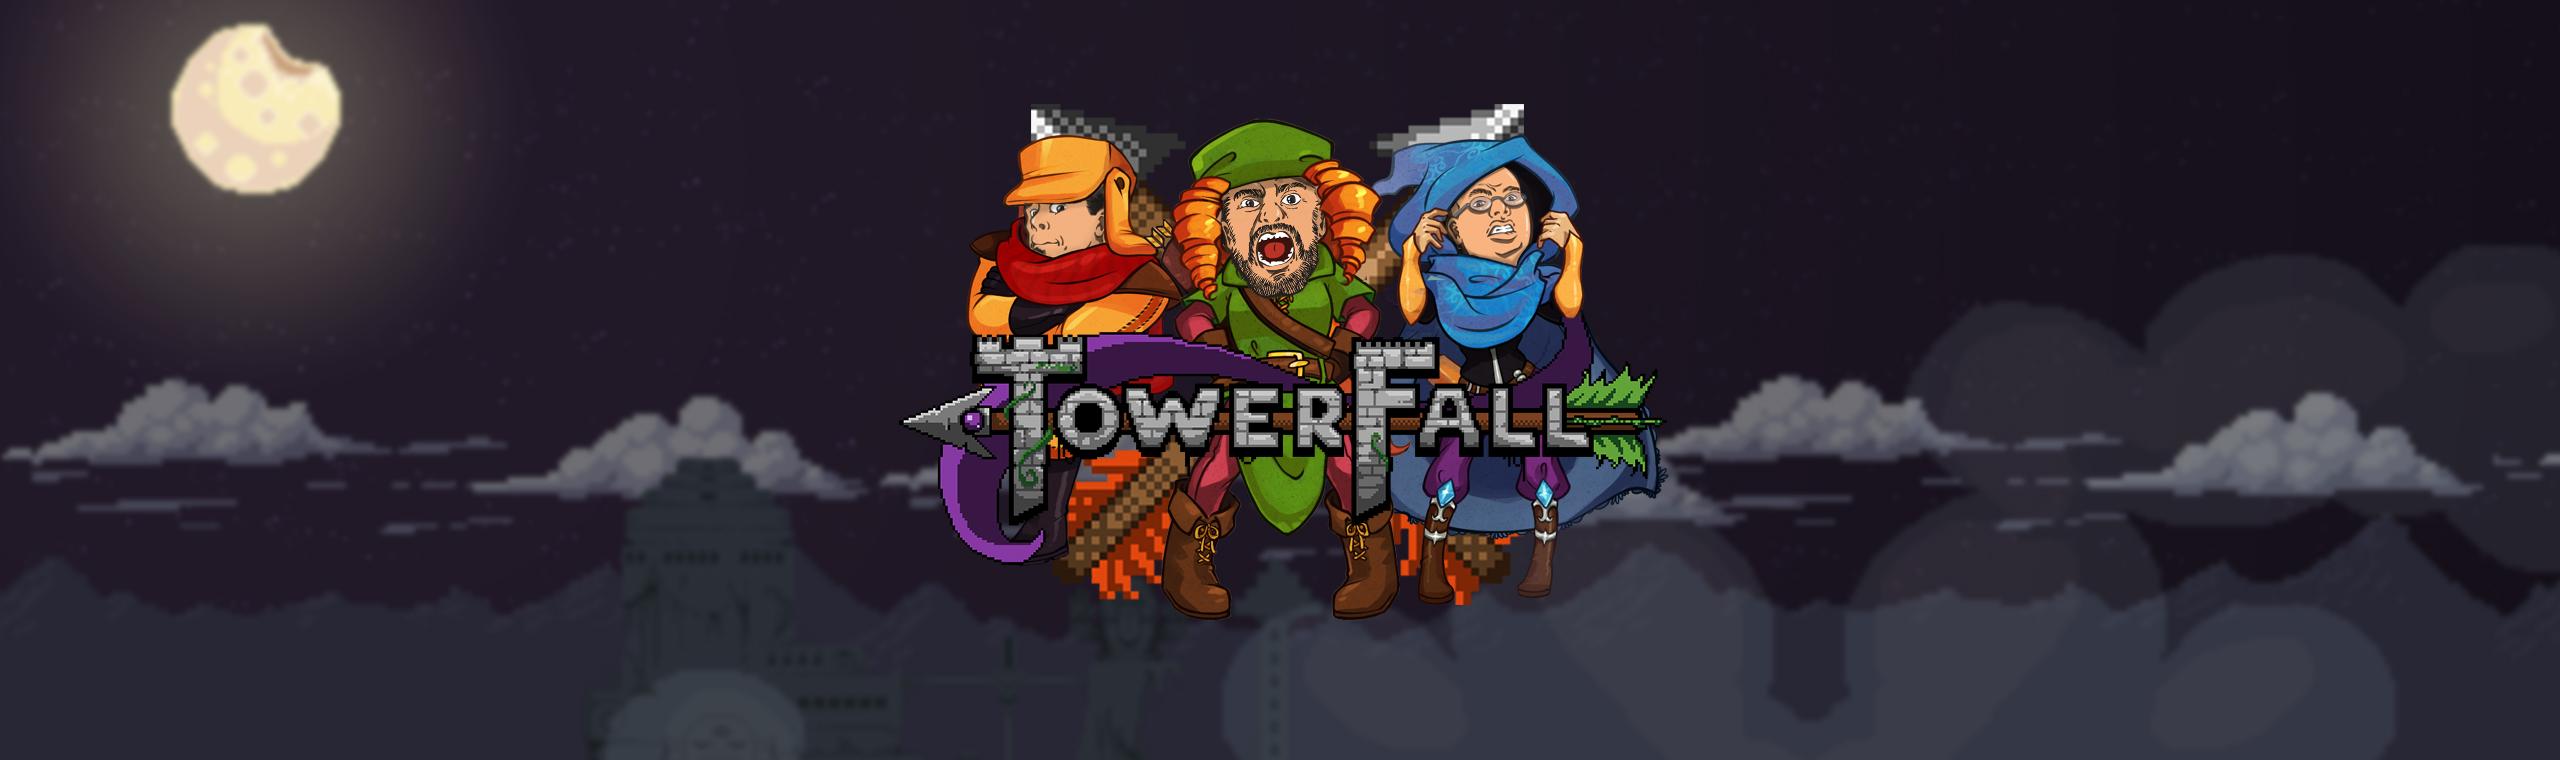 Towerfall Ascension 